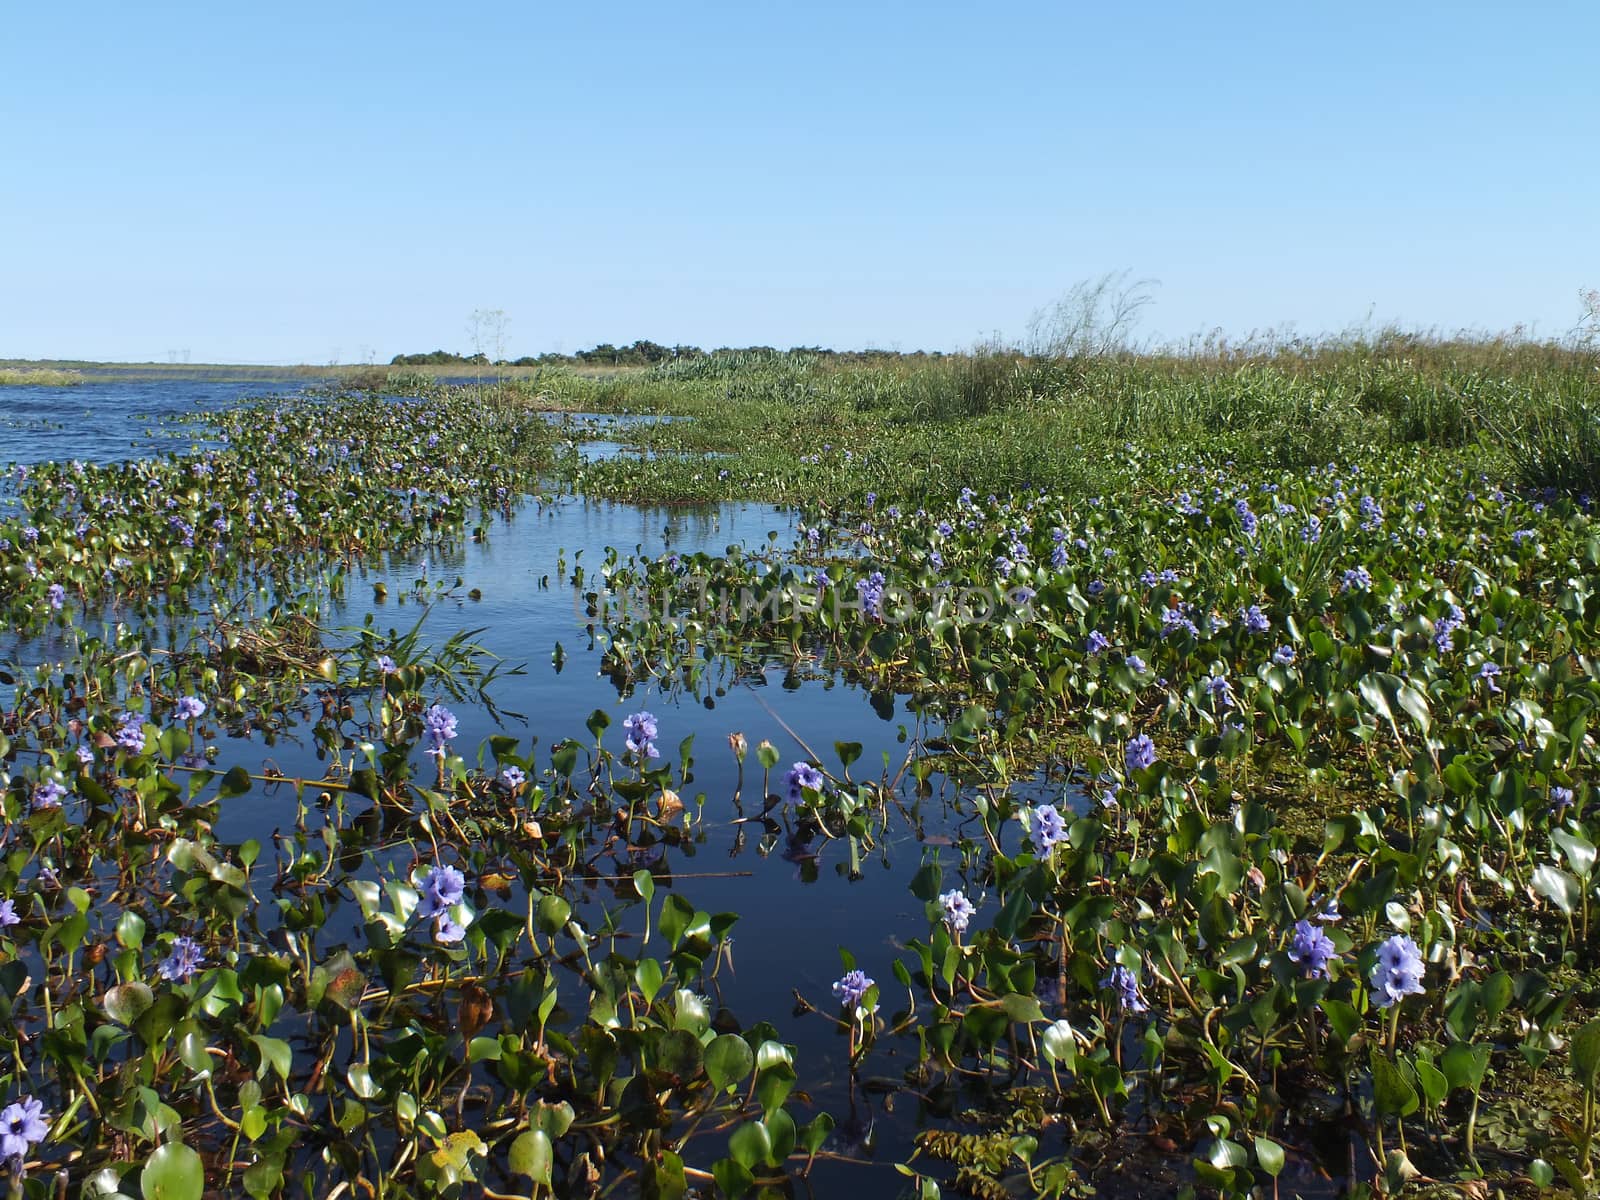 Water Hyacinth (Eichhornia) is an aquatic flowering plant that is native to South America